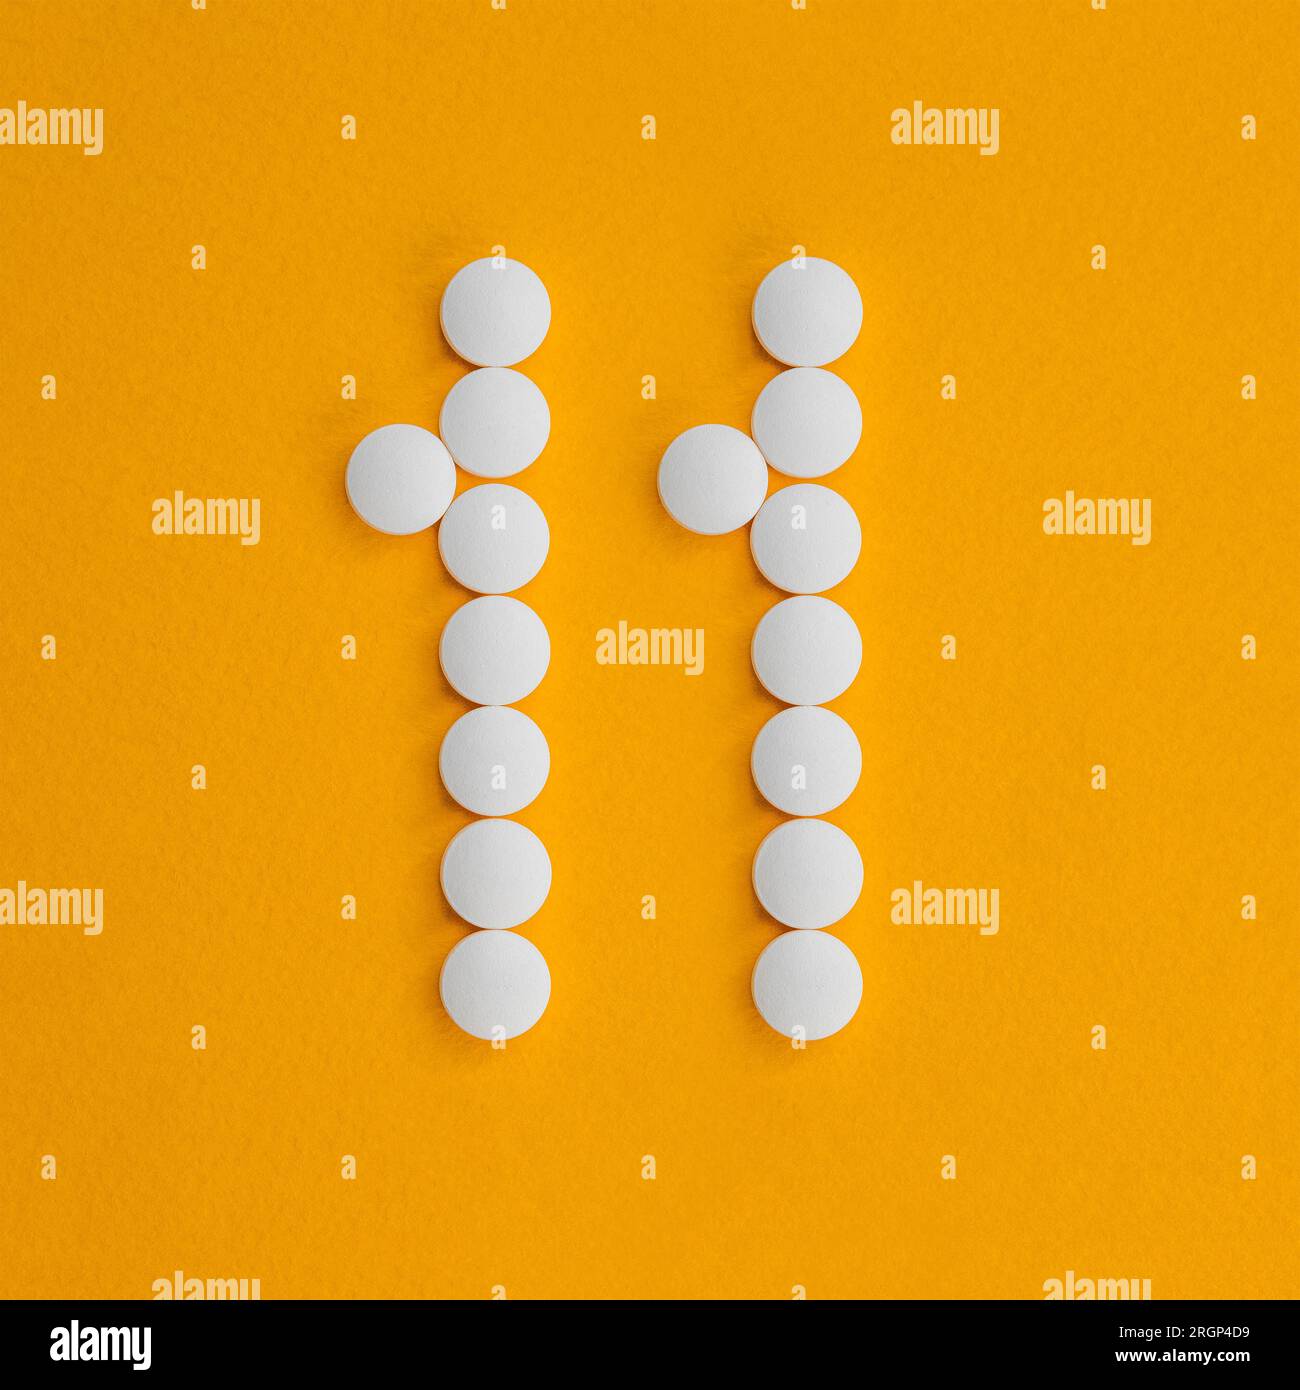 Math symbols made from medical capsules. Stock Photo